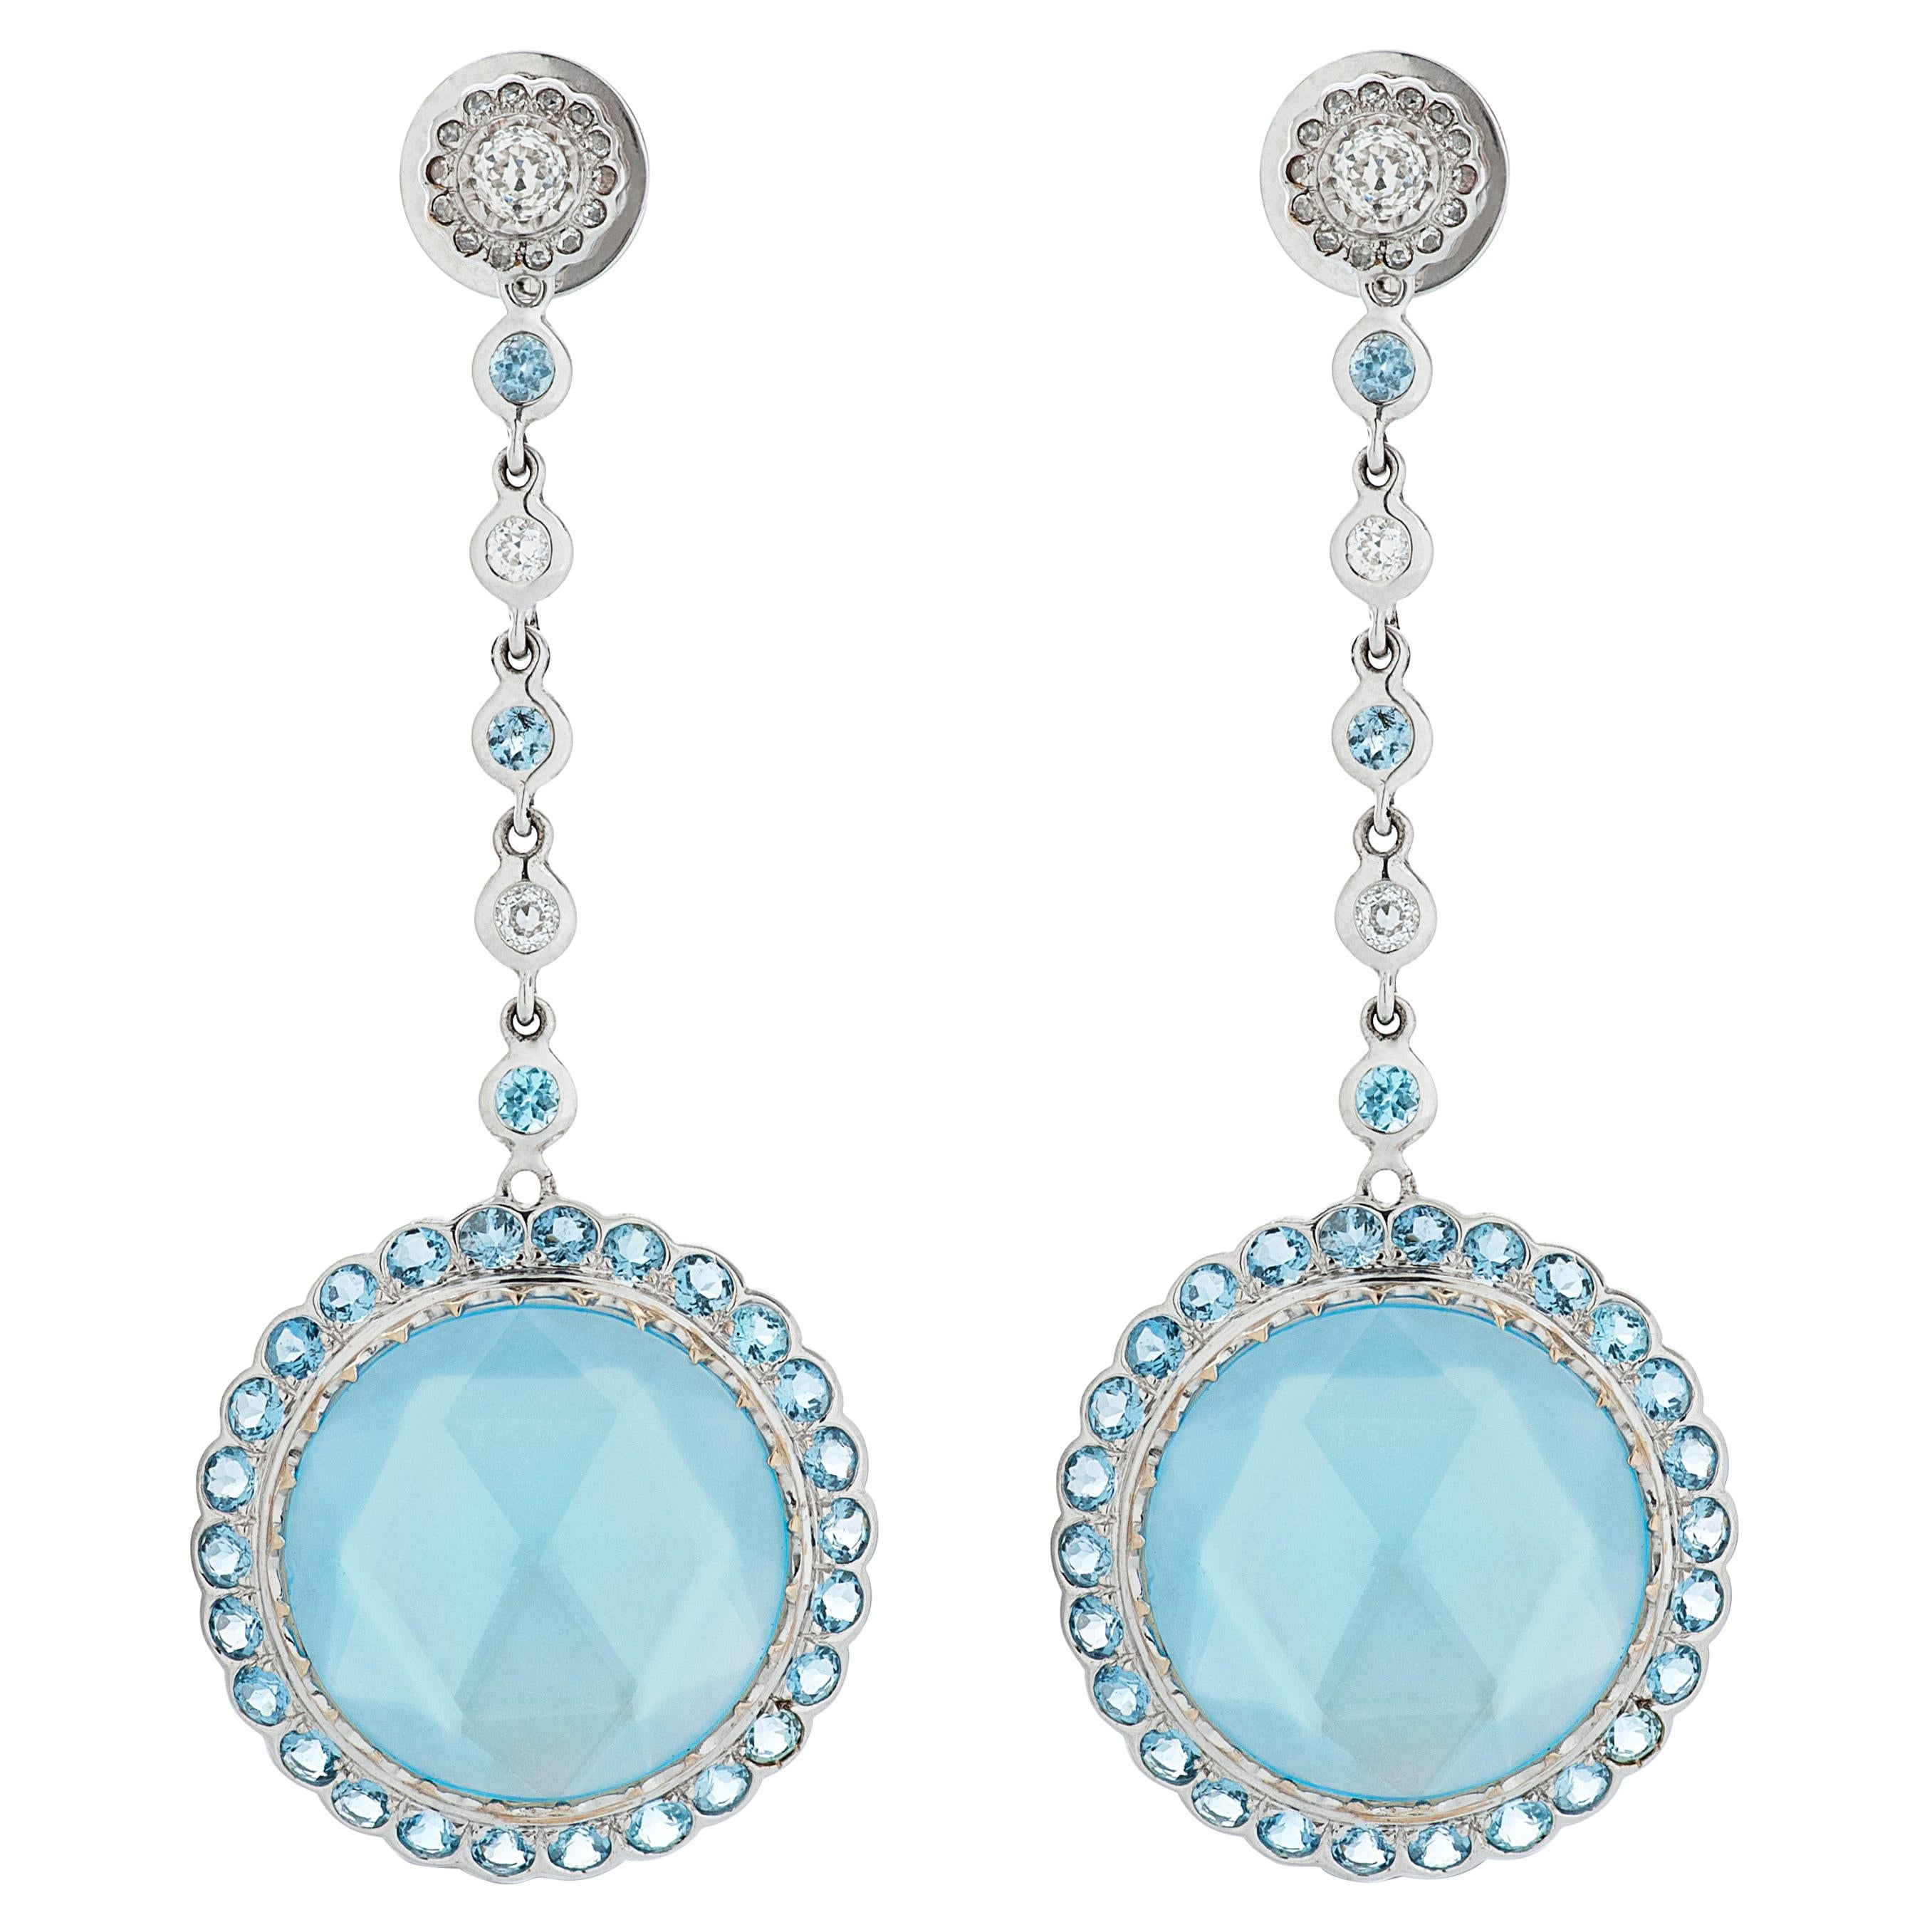 Laura Munder Topaz, Diamond and Mother of Pearl Dangle Earrings in 18KW Gold